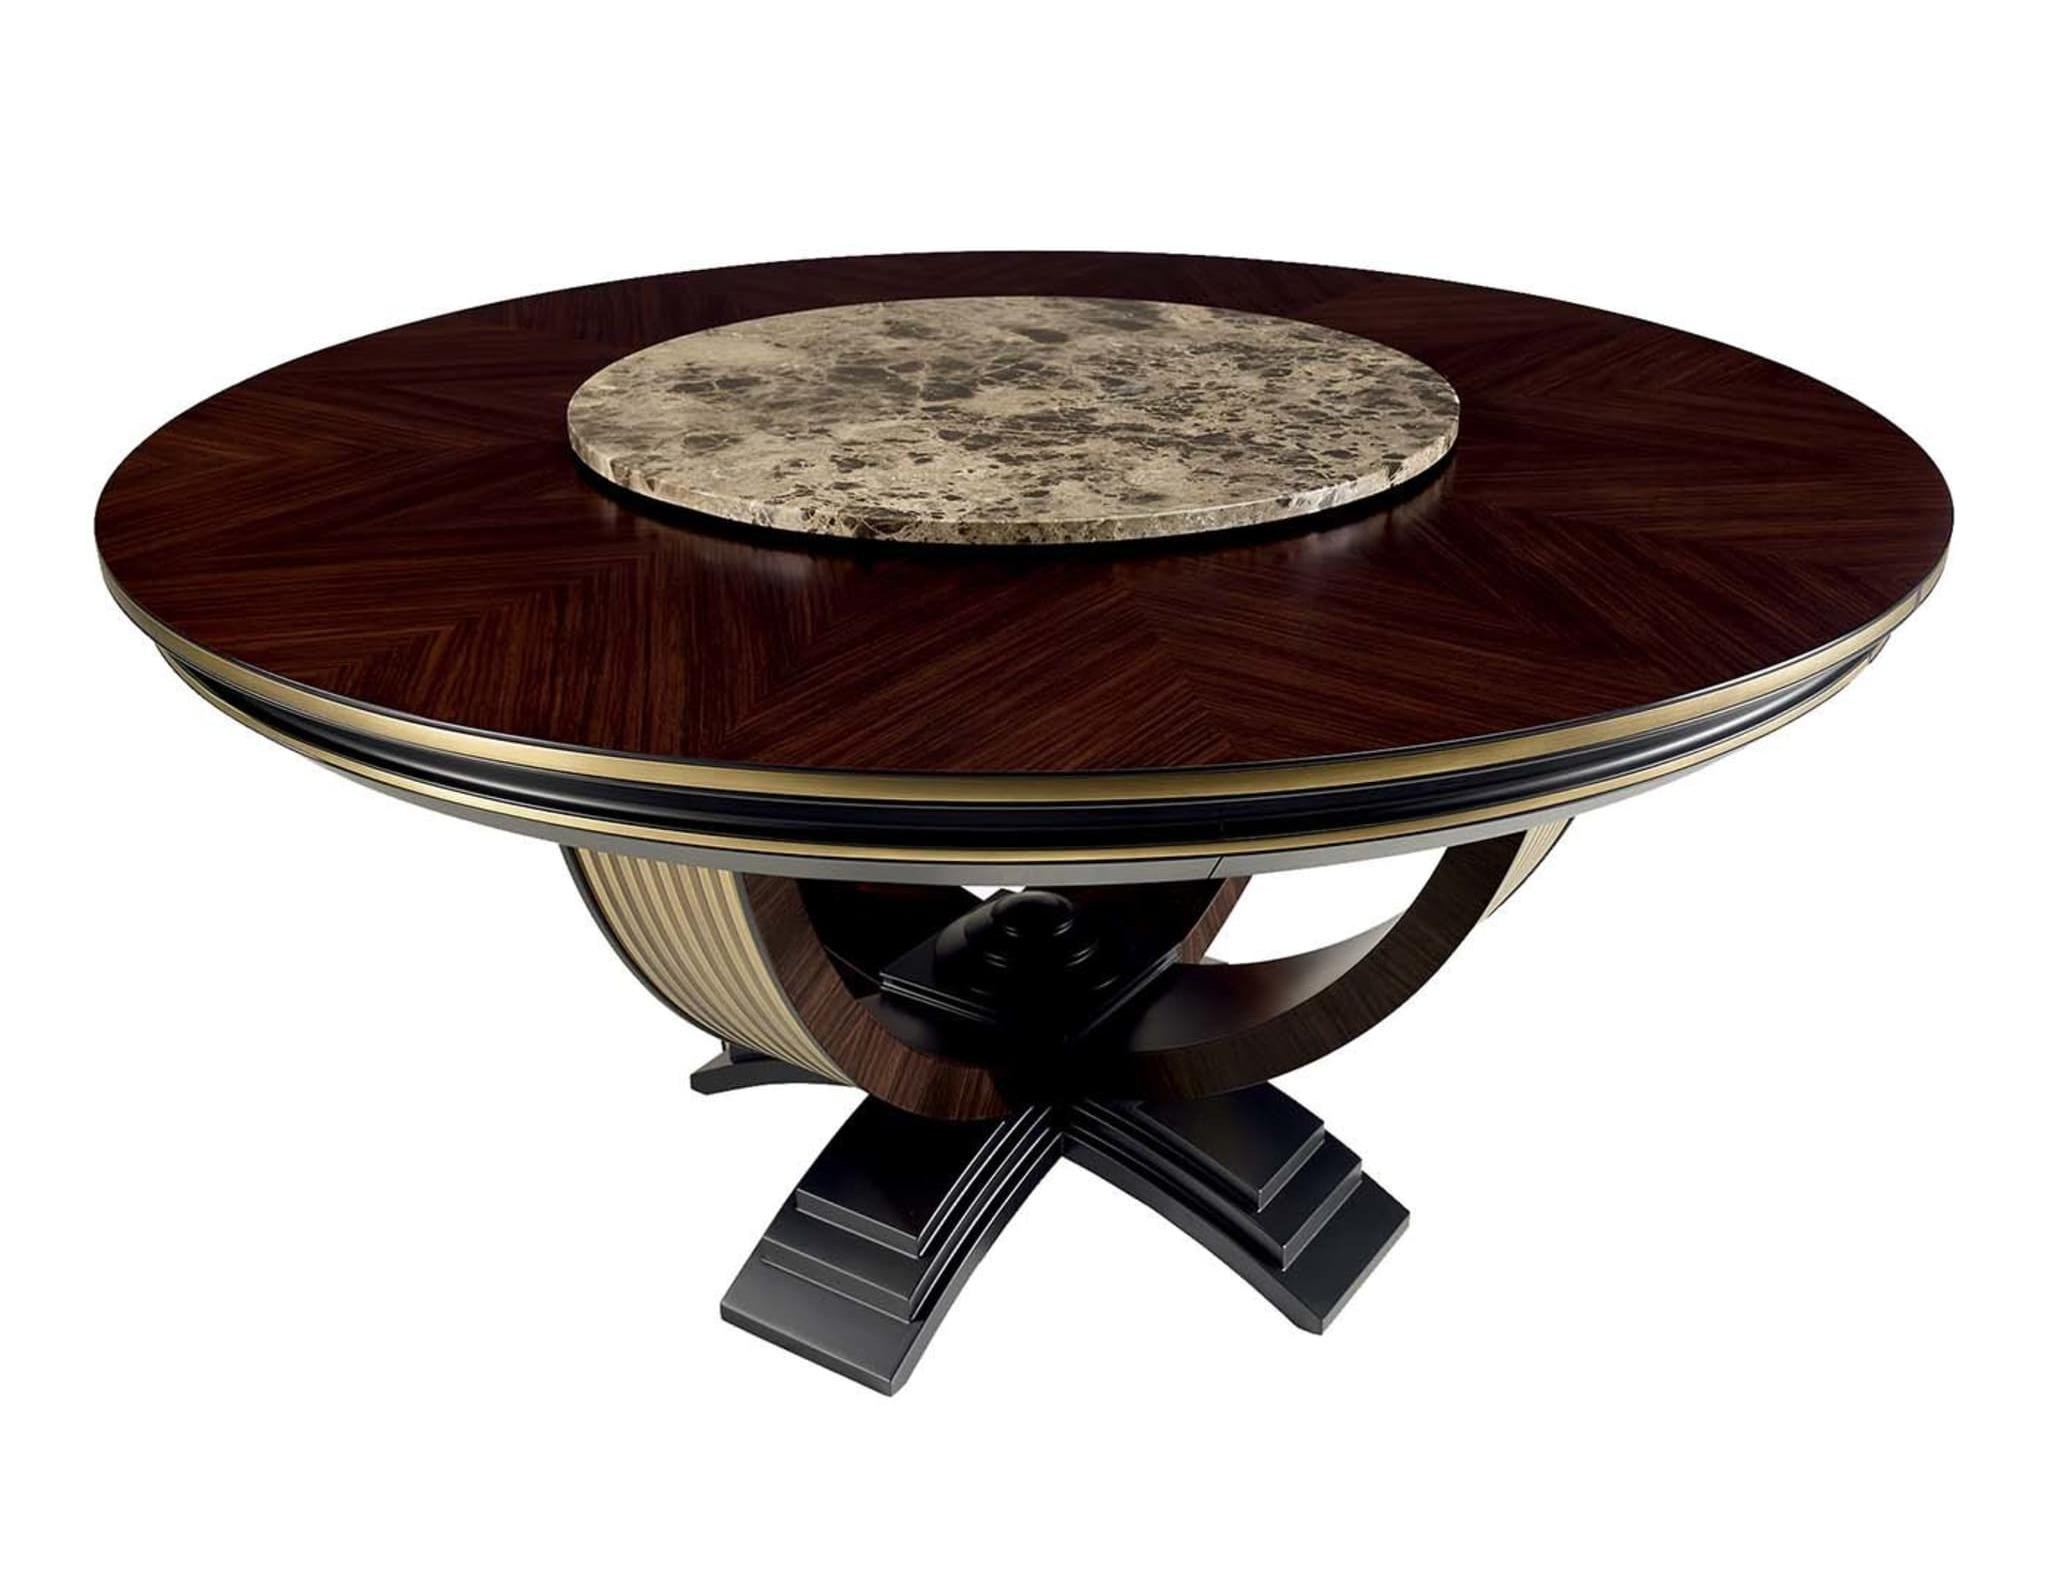 Luxury Round Dining Table